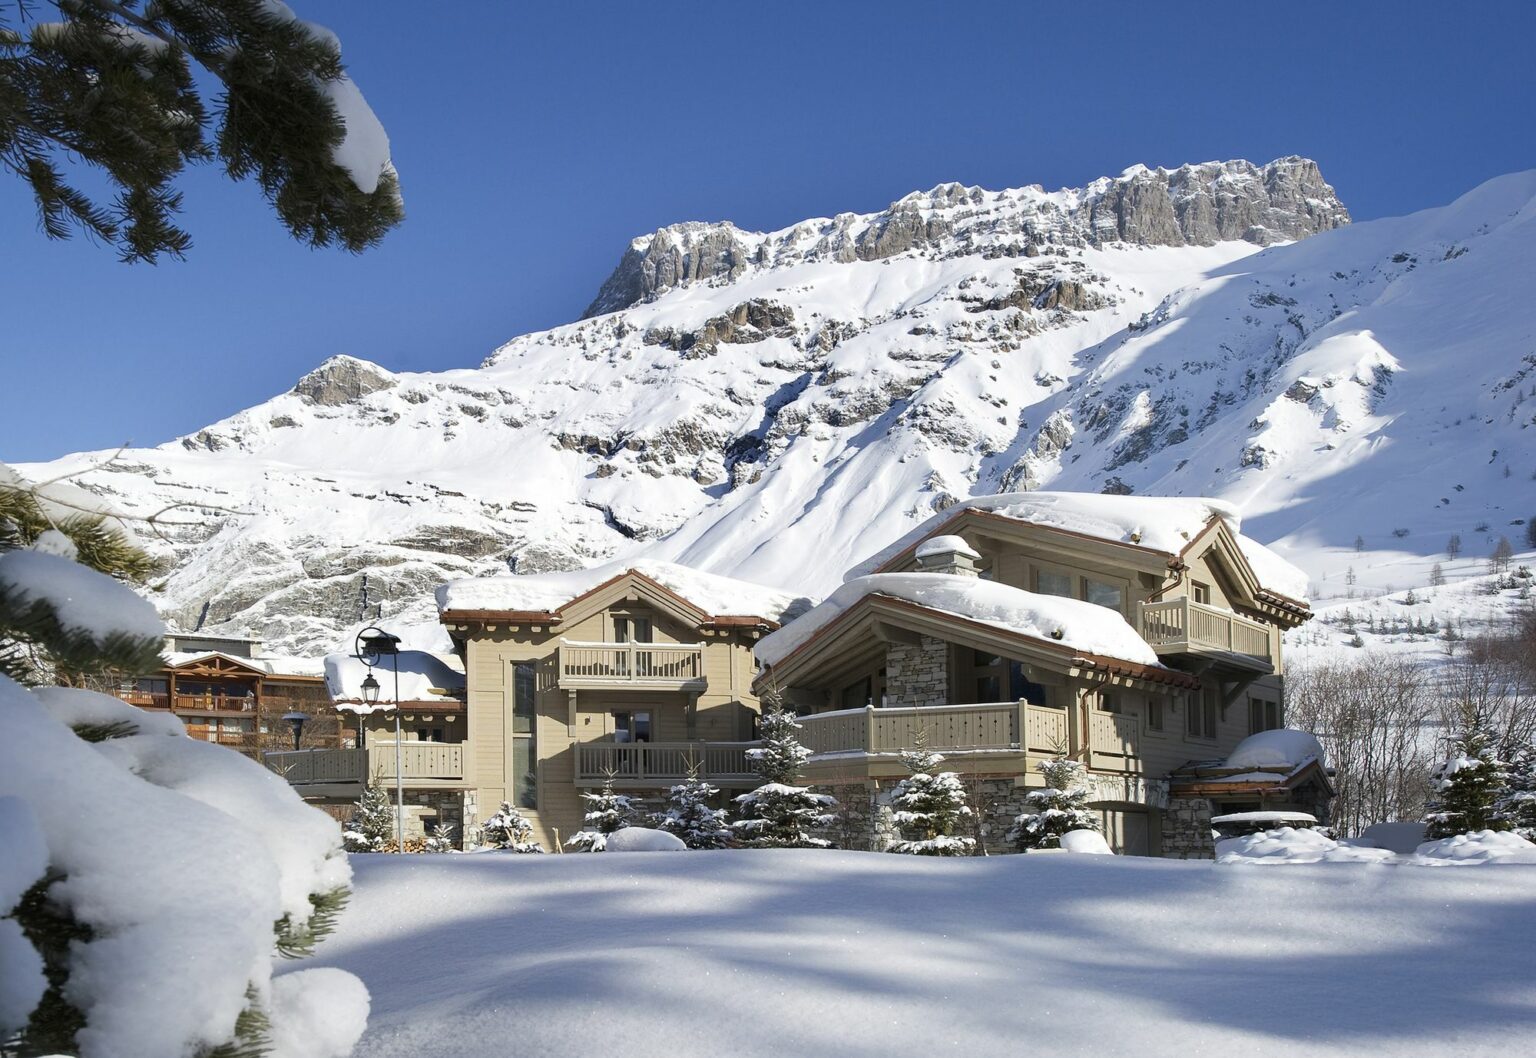 luxury ski chalets to rent in val d'isère|||||||||||||||||||||